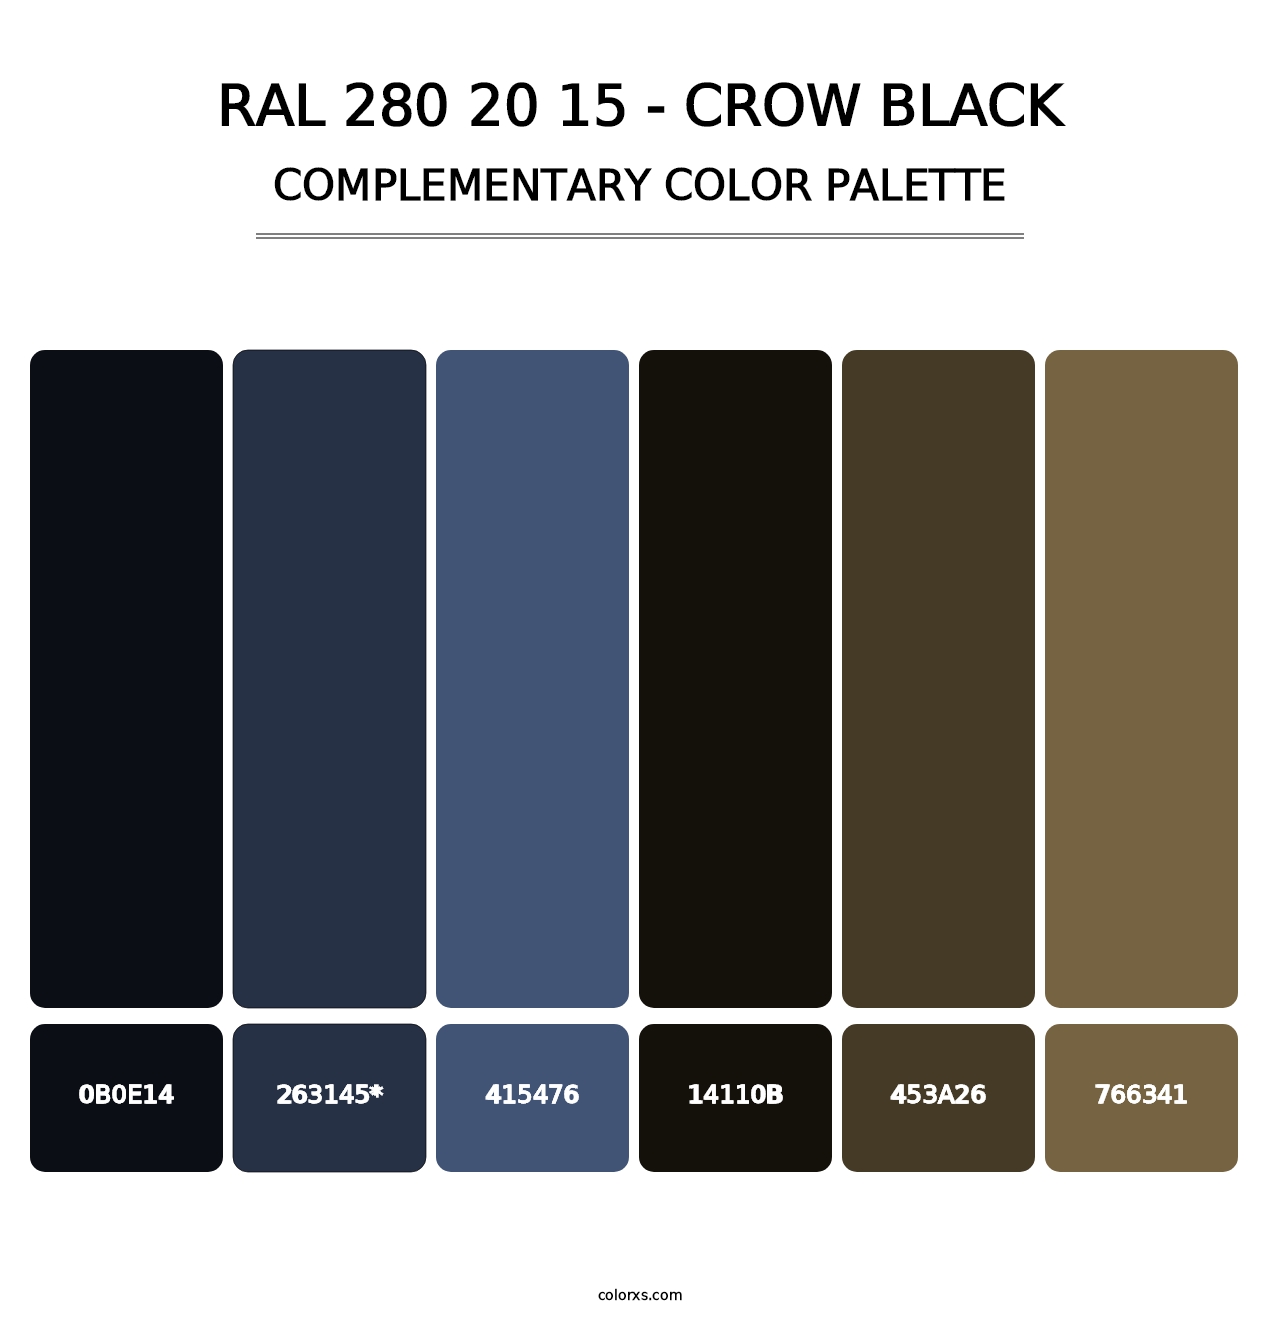 RAL 280 20 15 - Crow Black - Complementary Color Palette